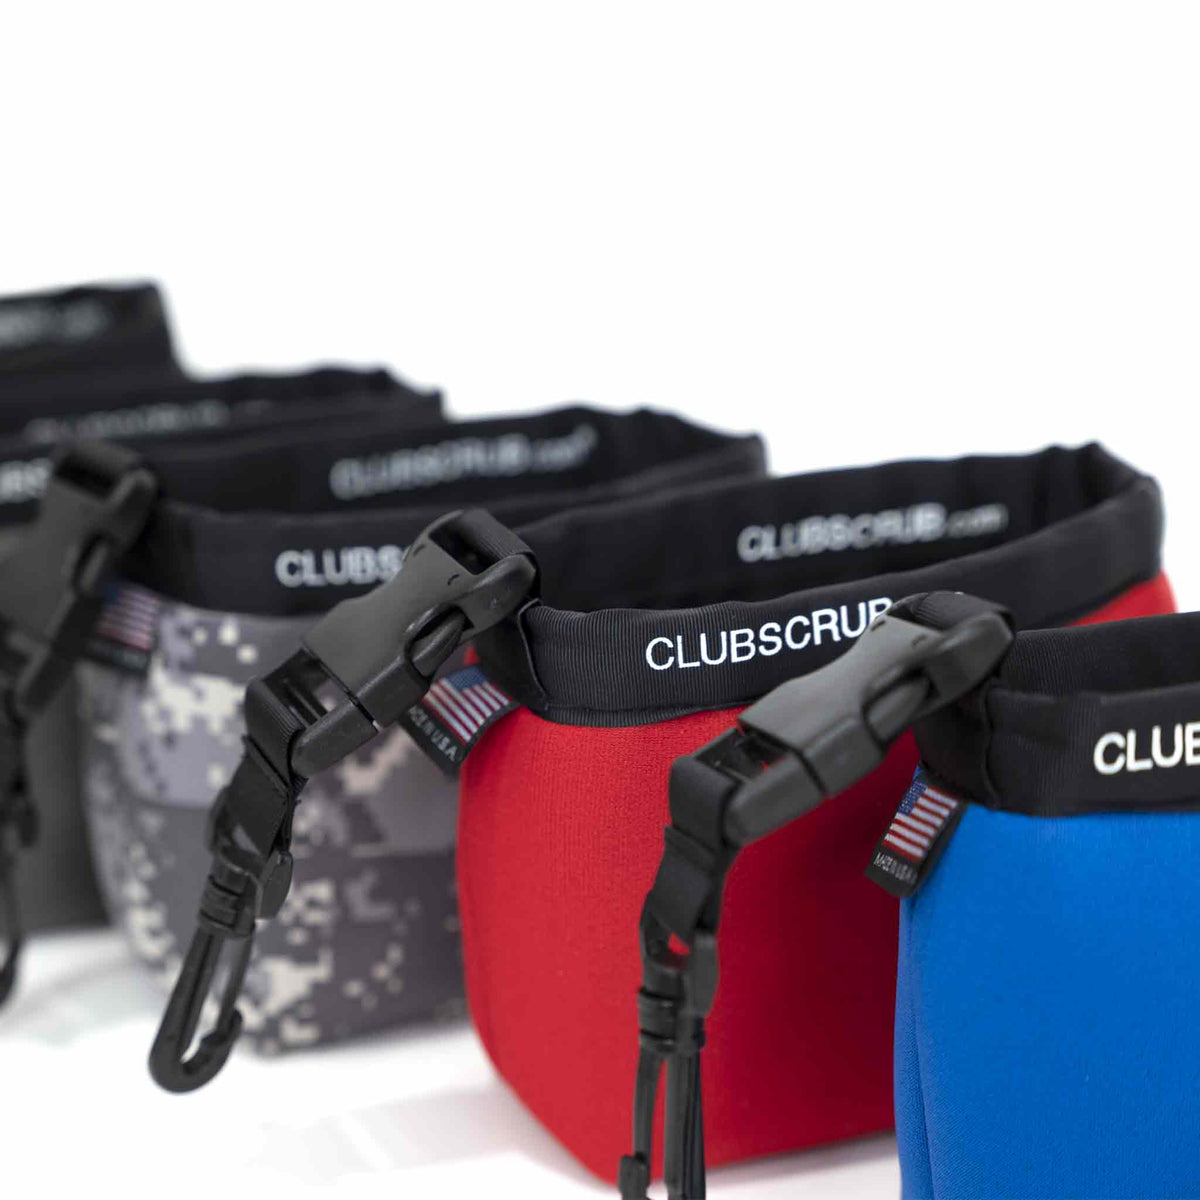 Club Scrub The ultimate golf accessory to clean up your game.